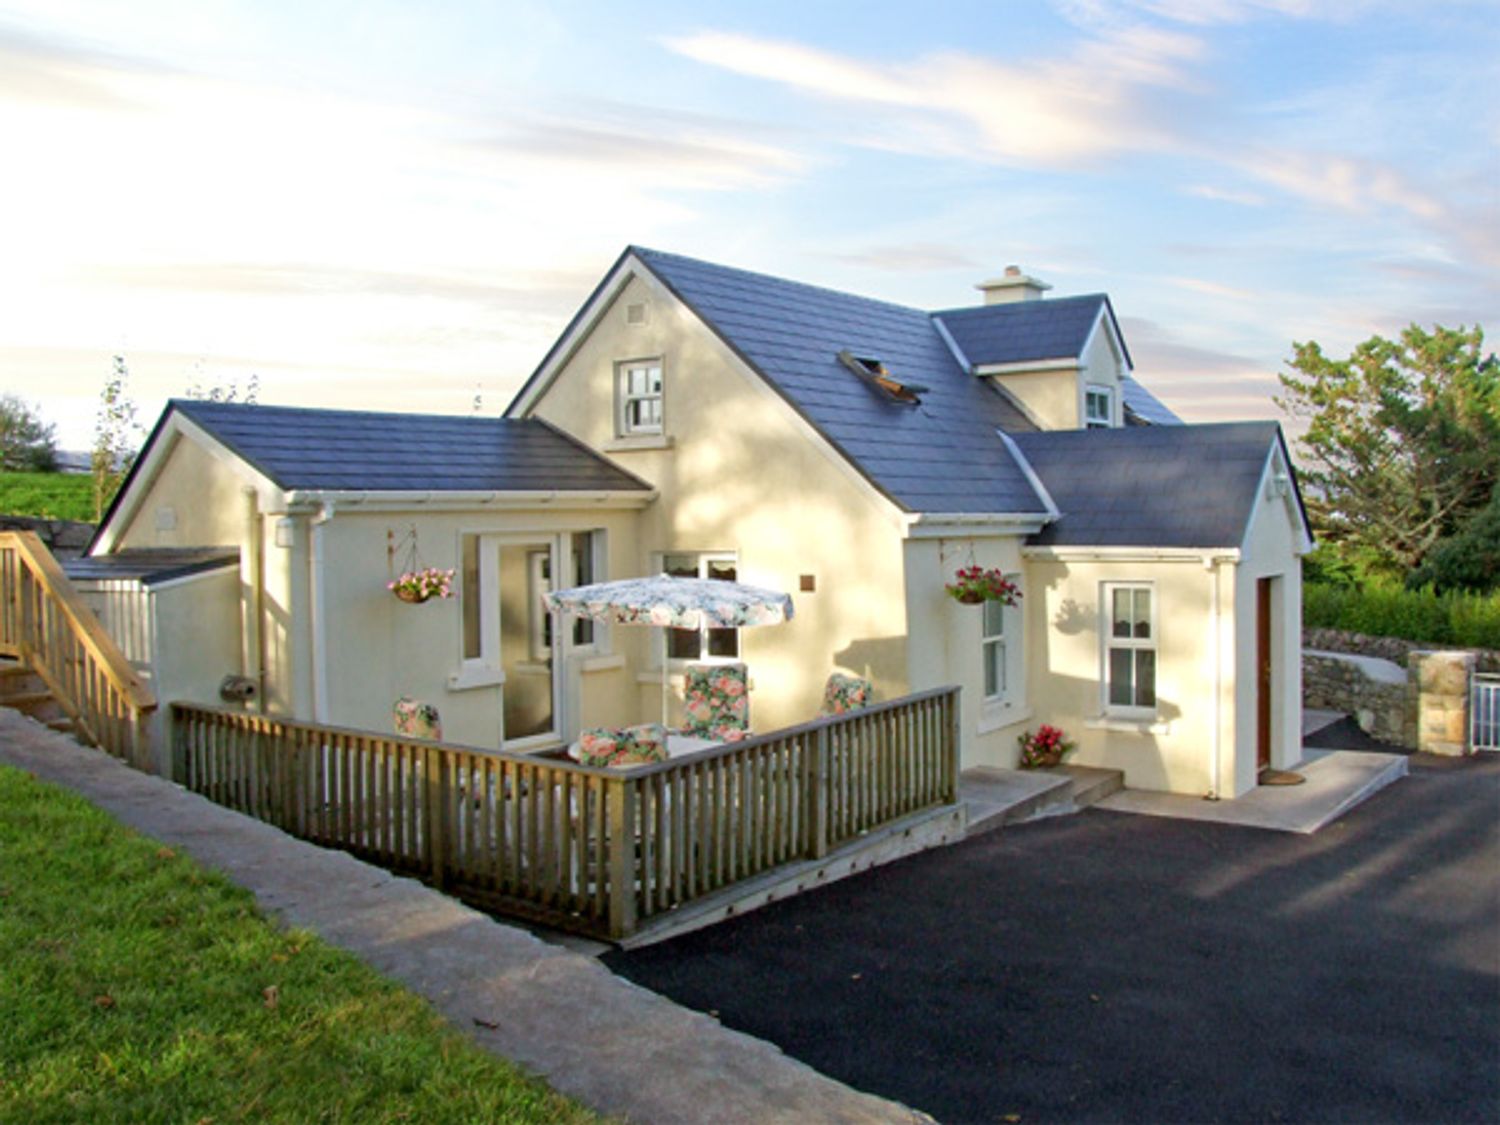 1 Clancy Cottages - Shancroagh & County Galway - 3706 - photo 1